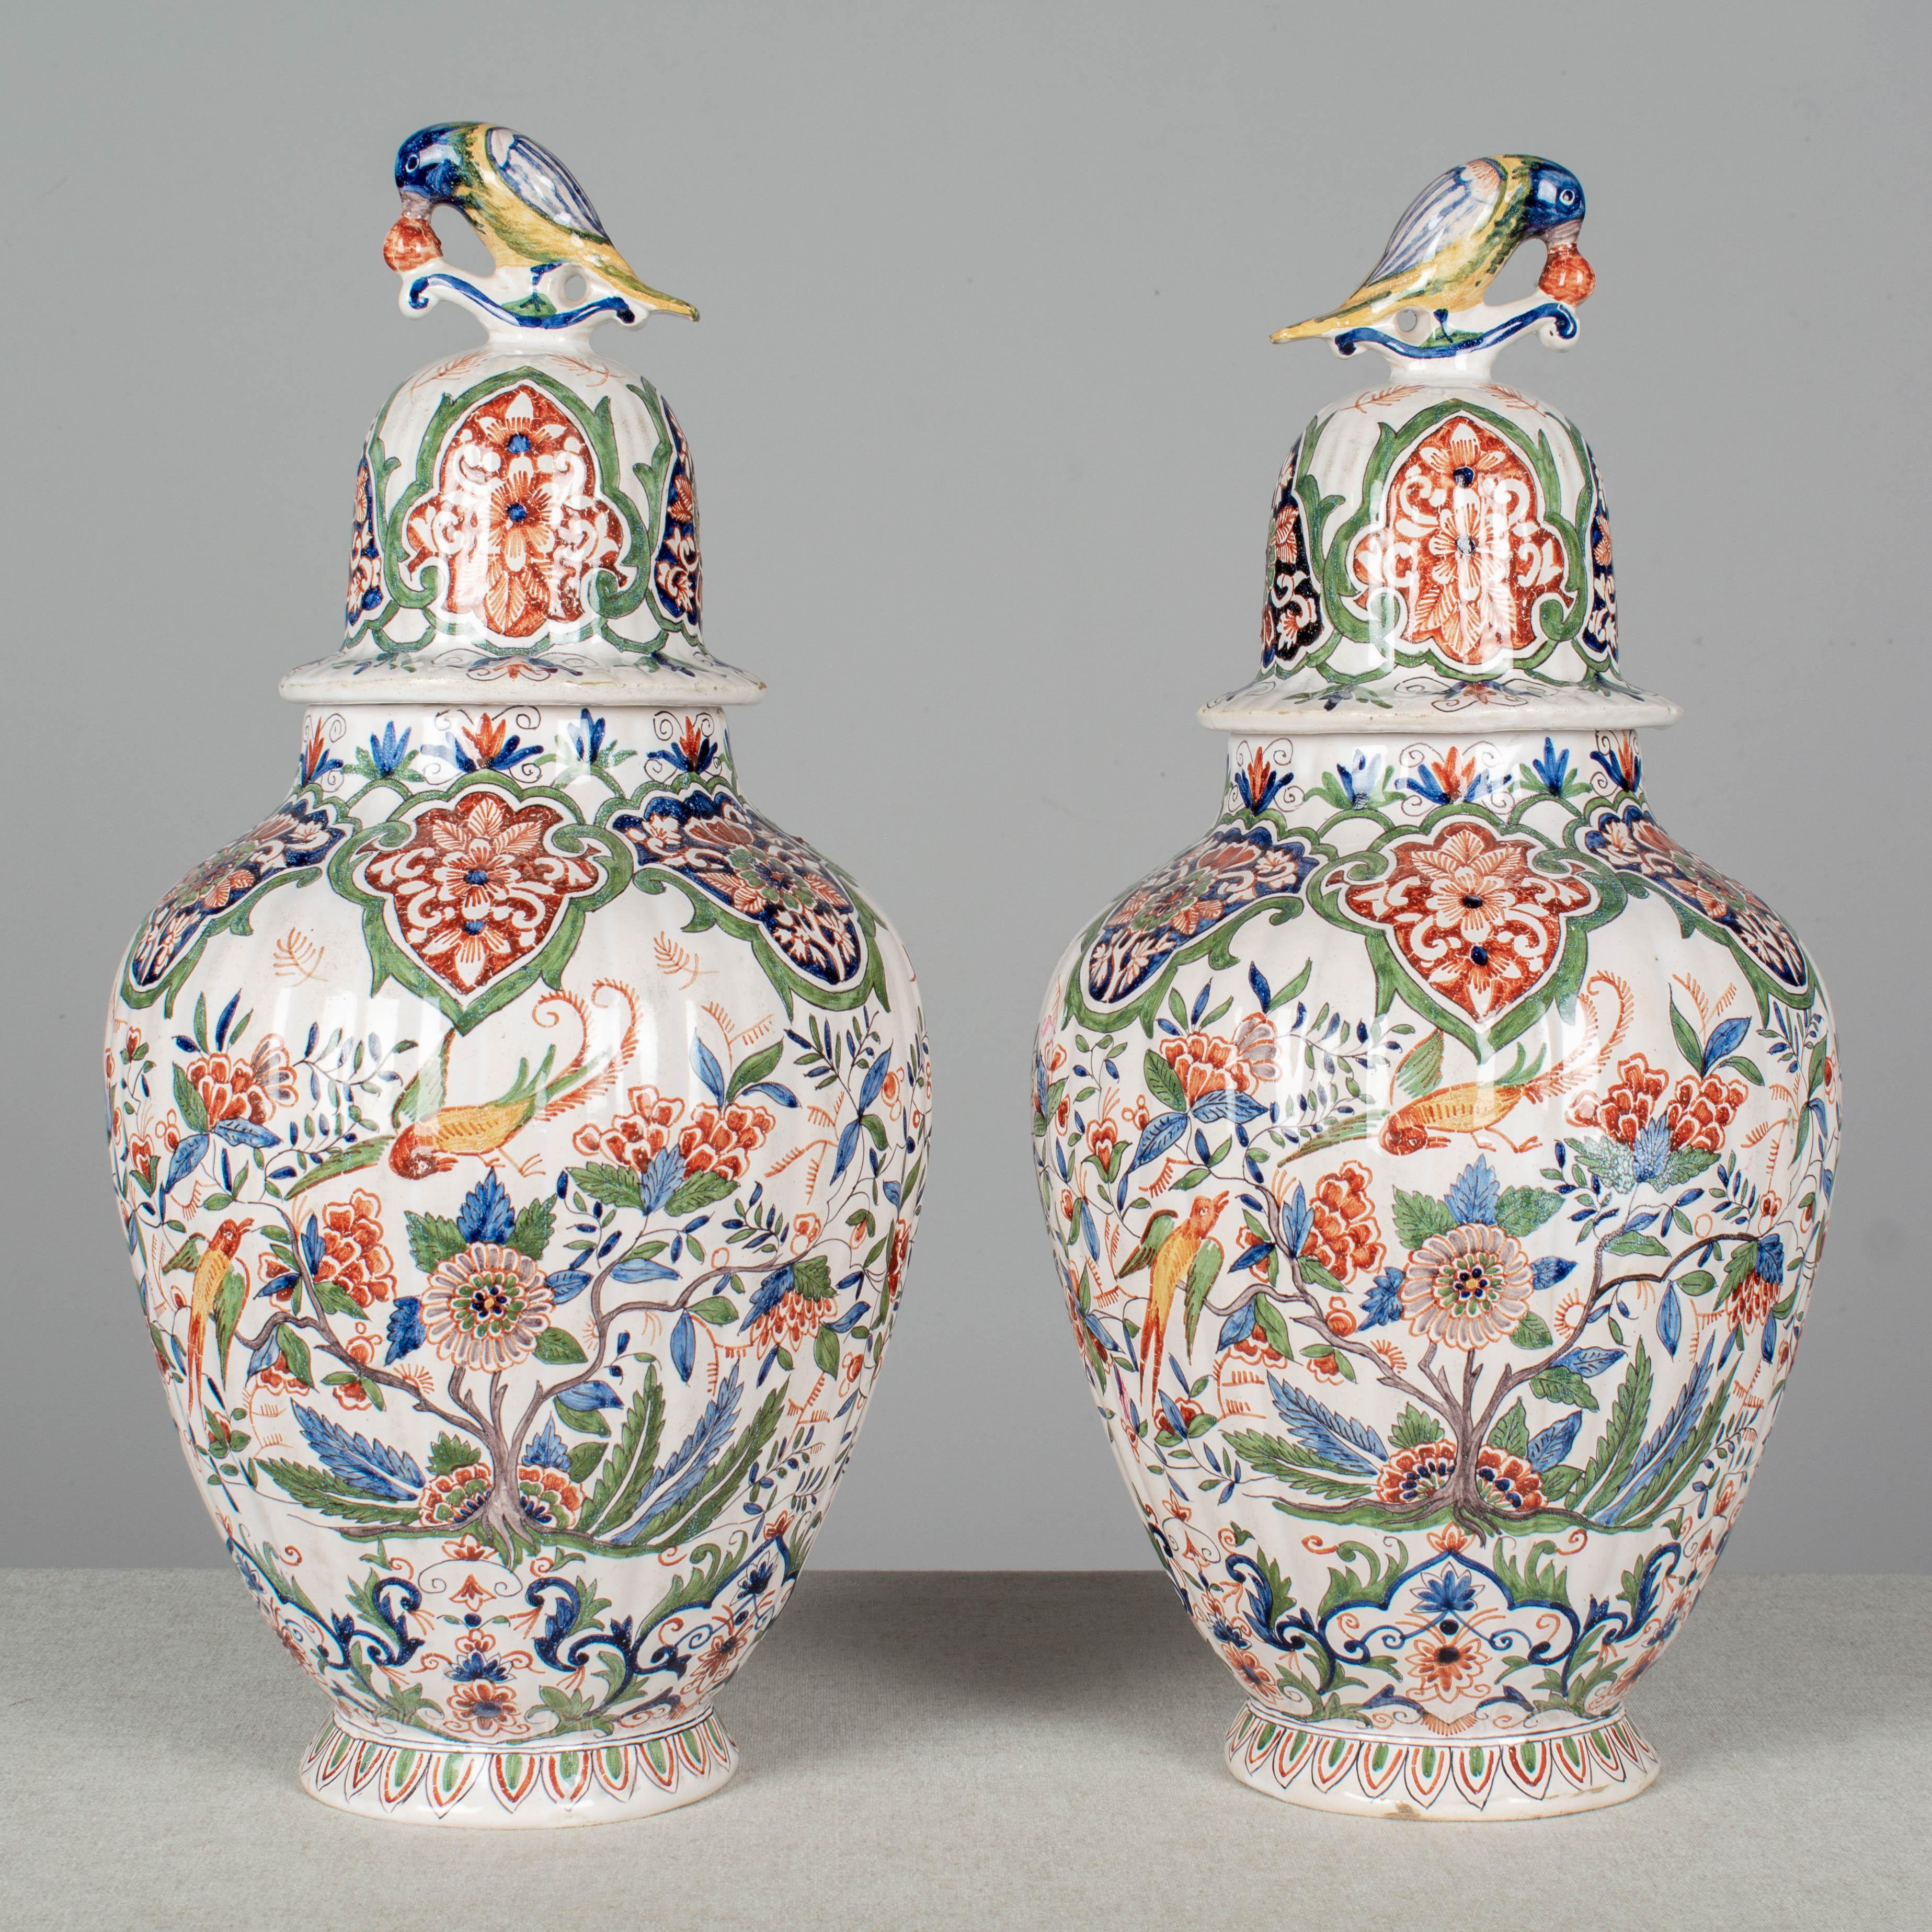 Hand-Painted Pair of 19th Century Delft Faience Ginger Jars